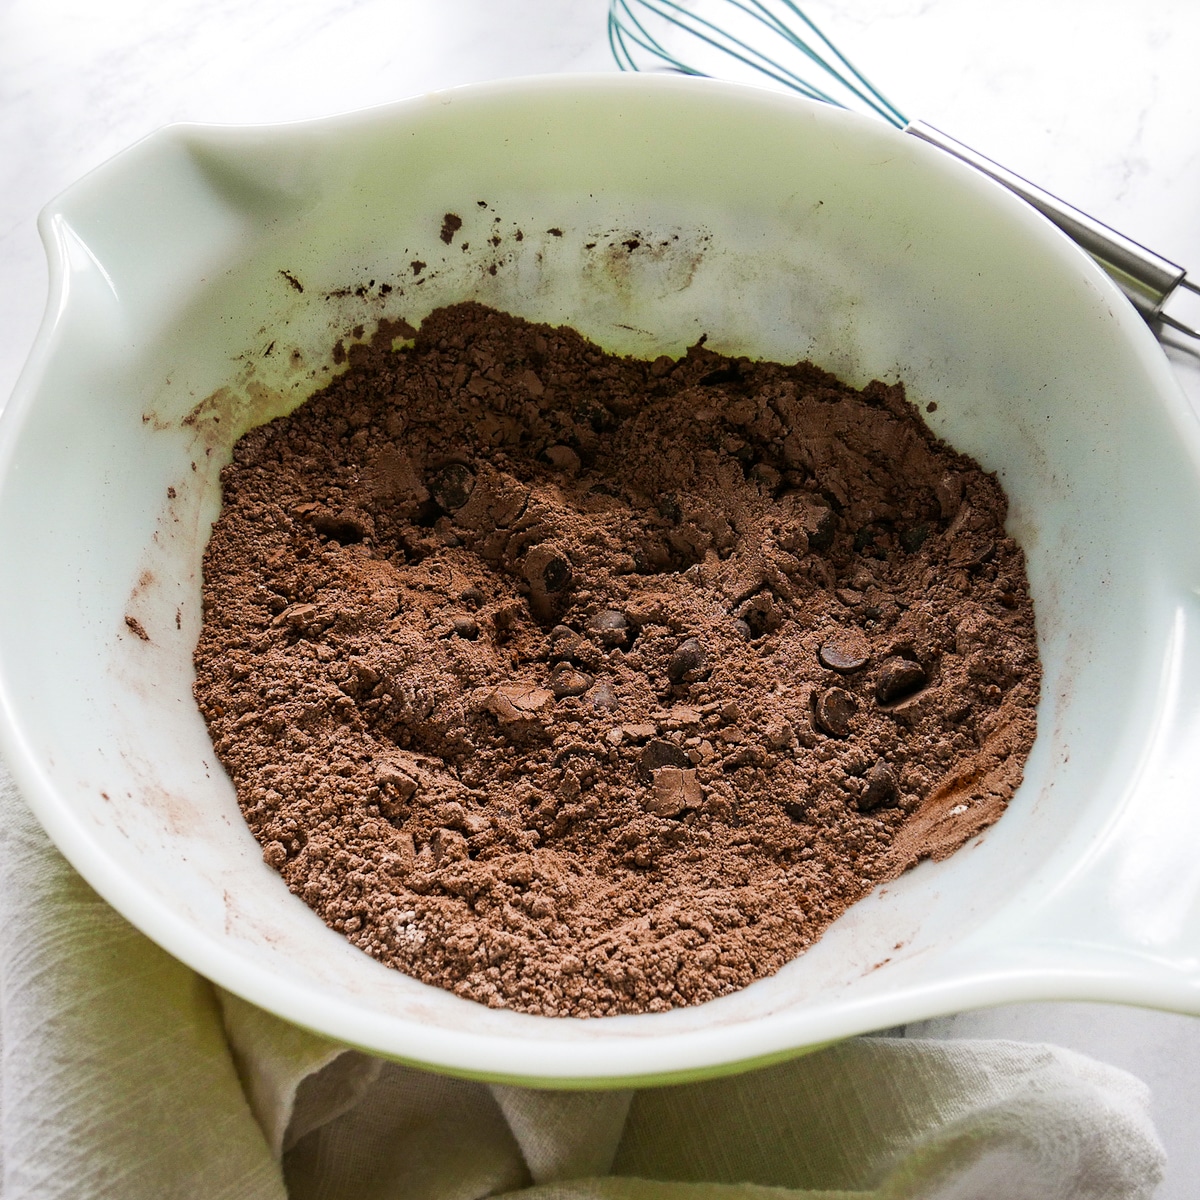 Flour, cocoa powder, baking soda, cinnamon, salt, and chocolate chips mixed in a bowl.